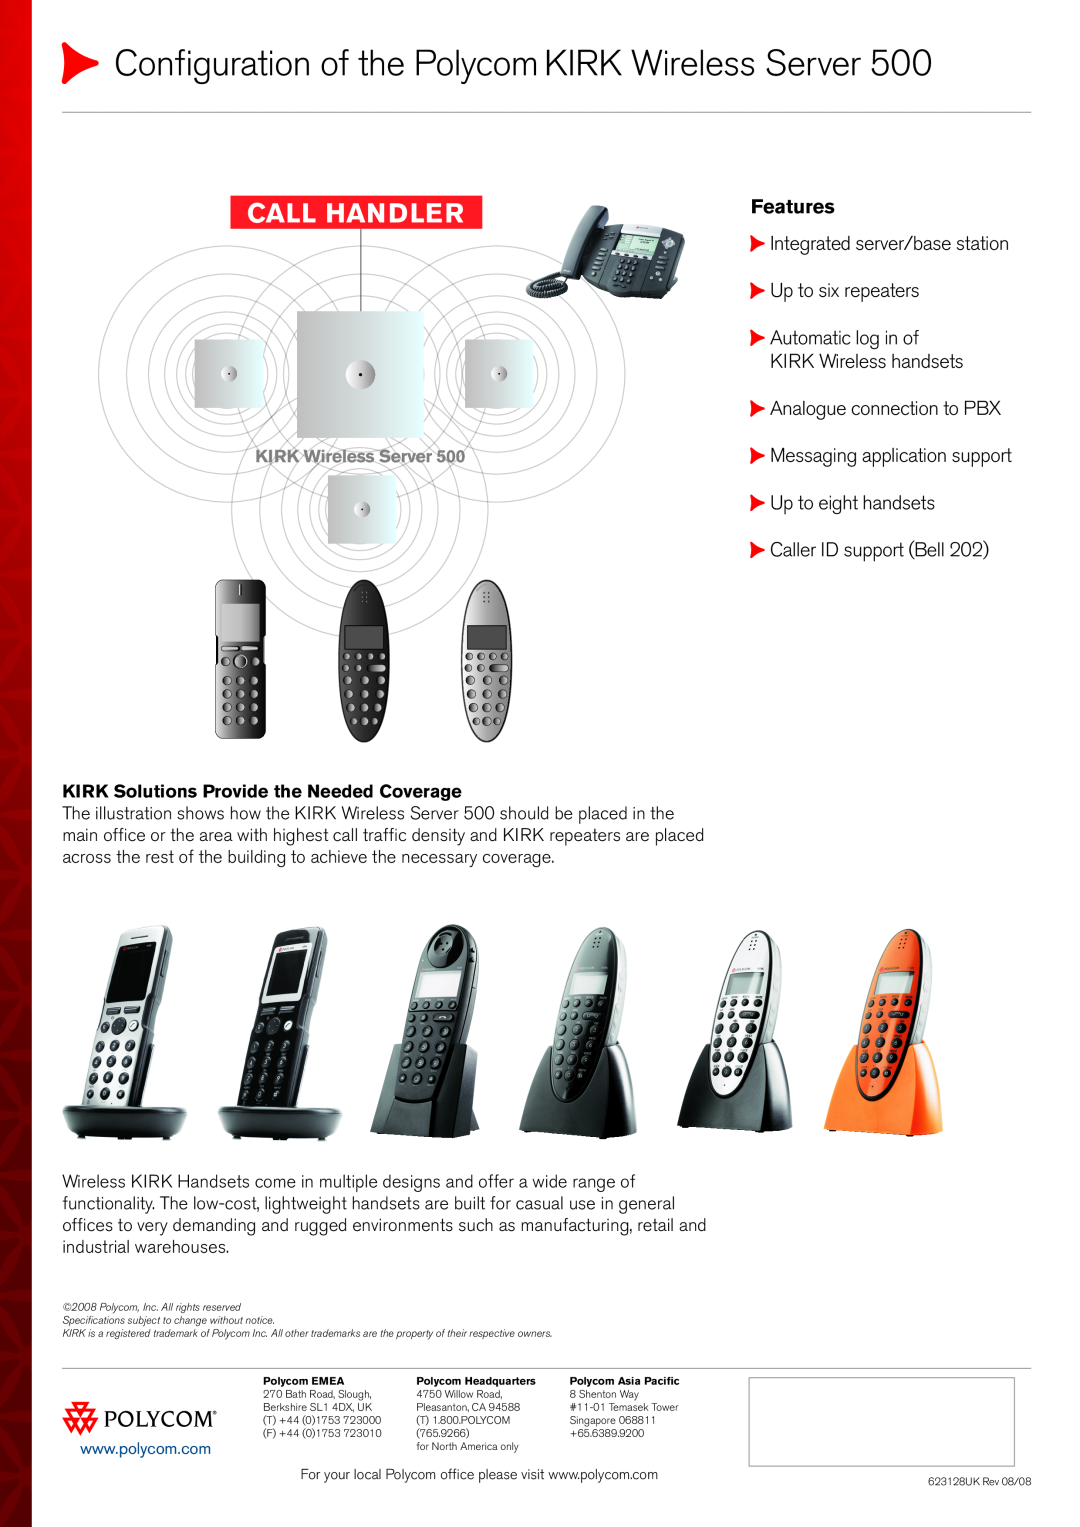 Polycom 623128UK Features, Integrated server/base station Up to six repeaters, Up to eight handsets Caller ID support Bell 